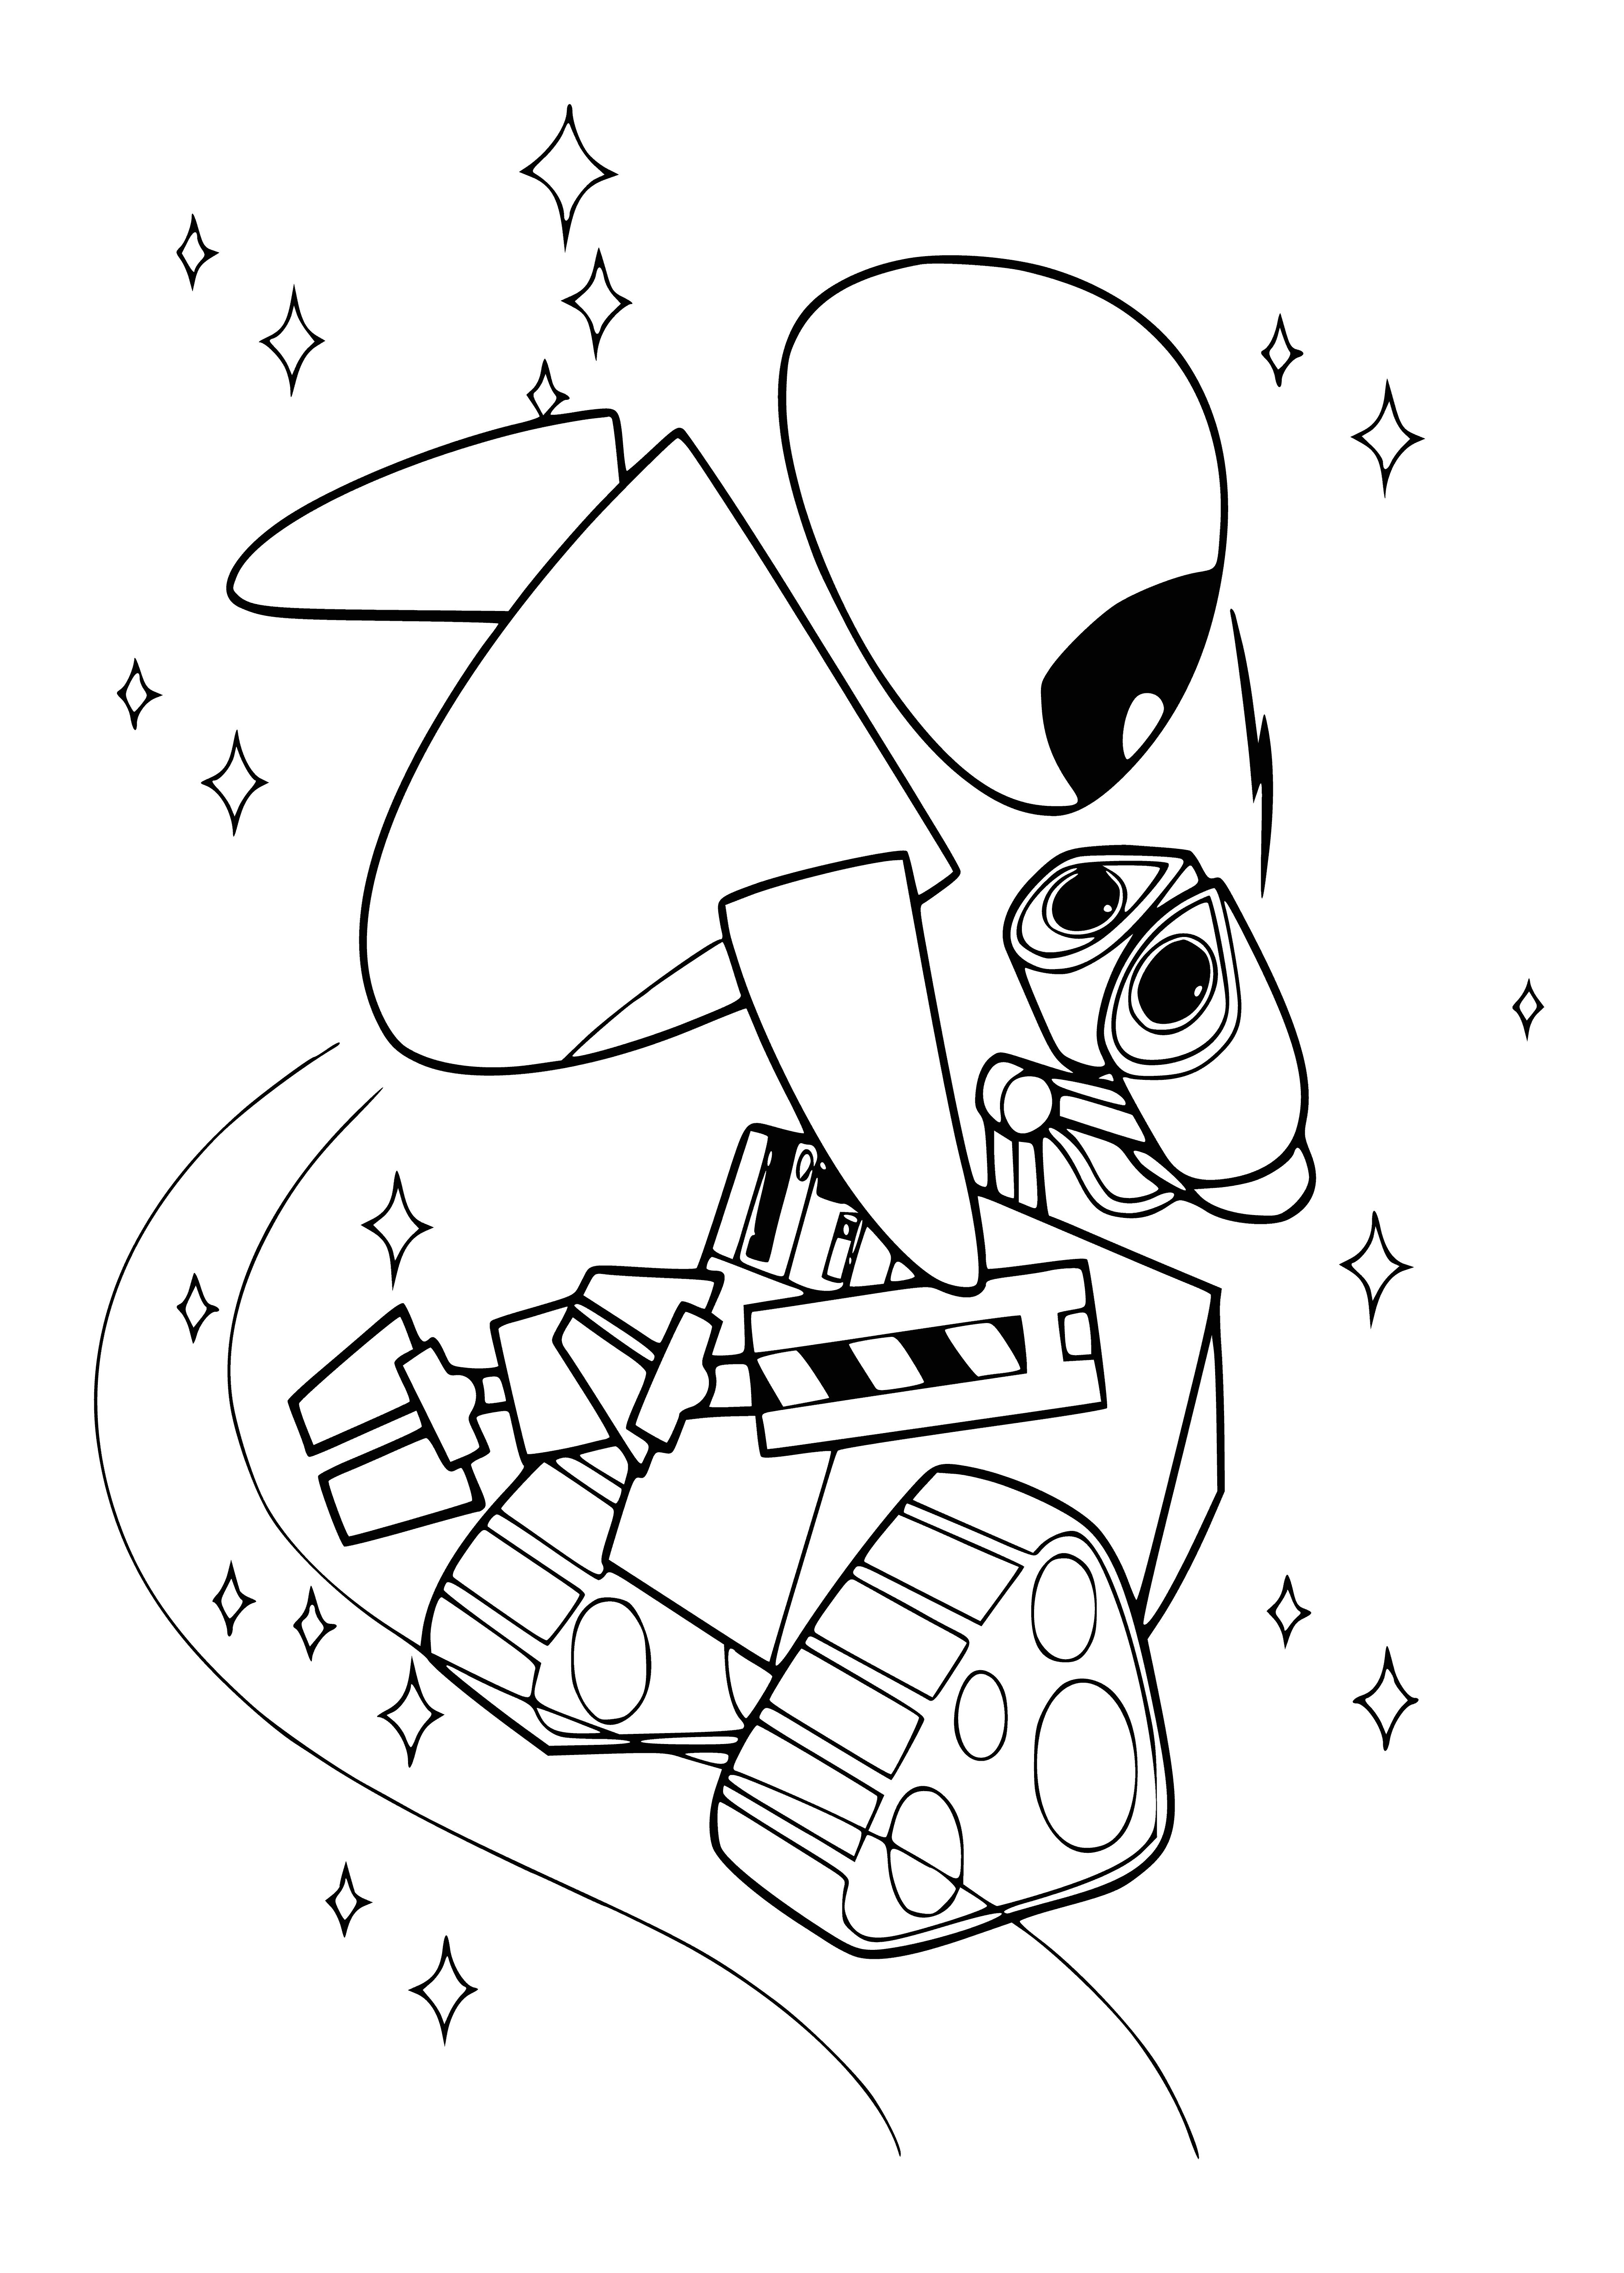 coloring page: Wall-e holds a star while spinning in a starry room. #wall-e